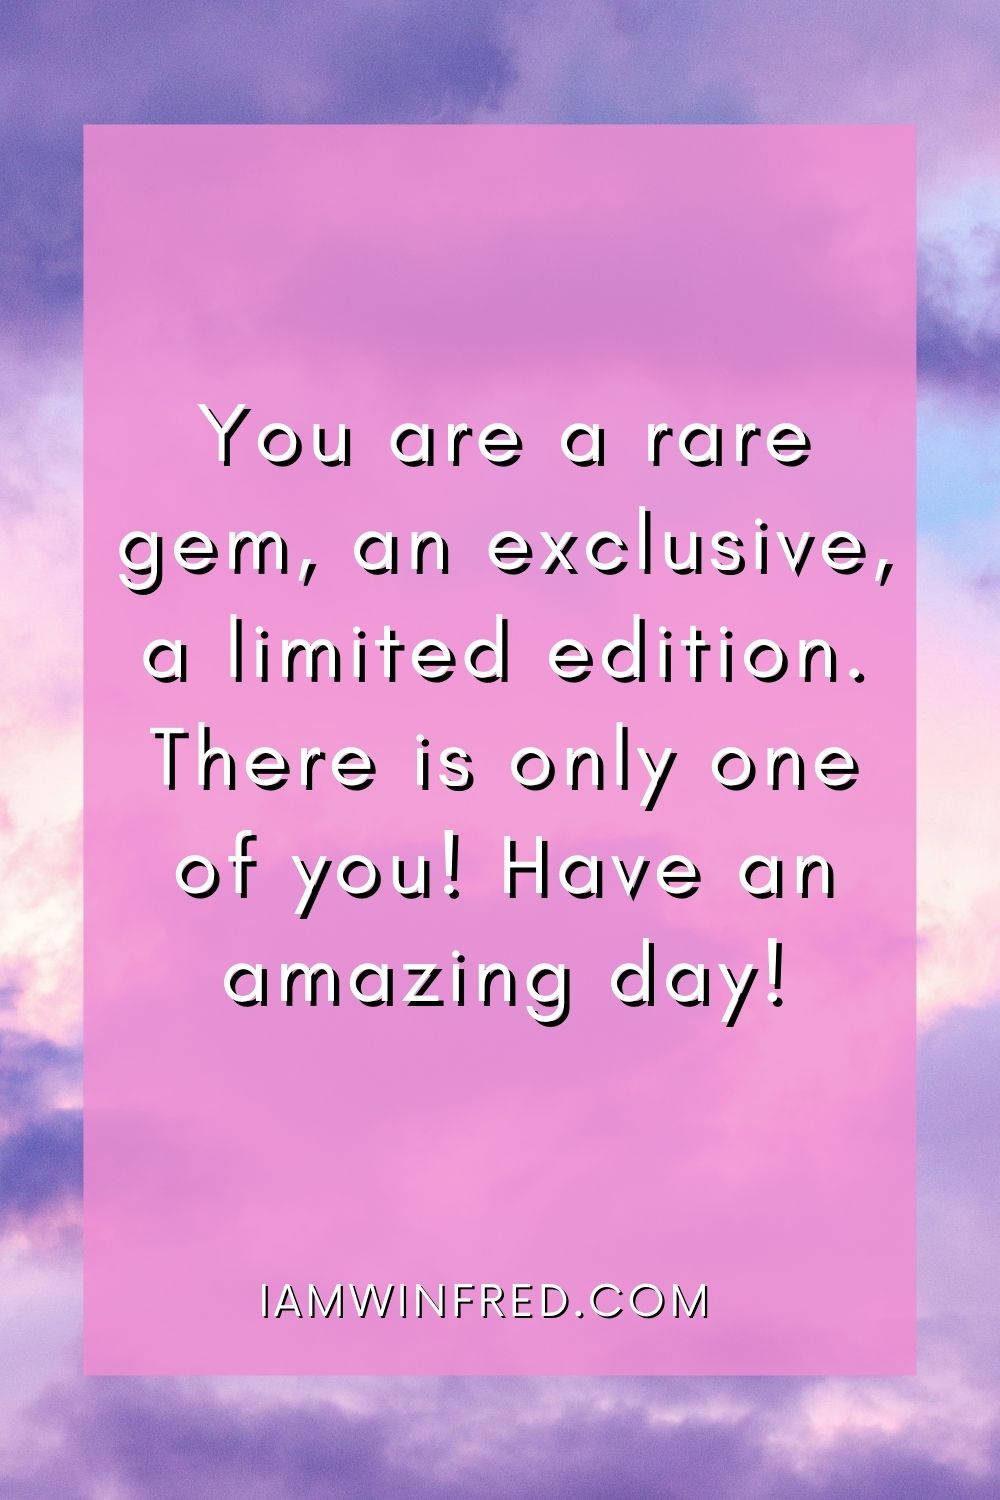 You Are A Rare Gem An Exclusive A Limited Edition. There Is Only One Of You Have An Amazing Day